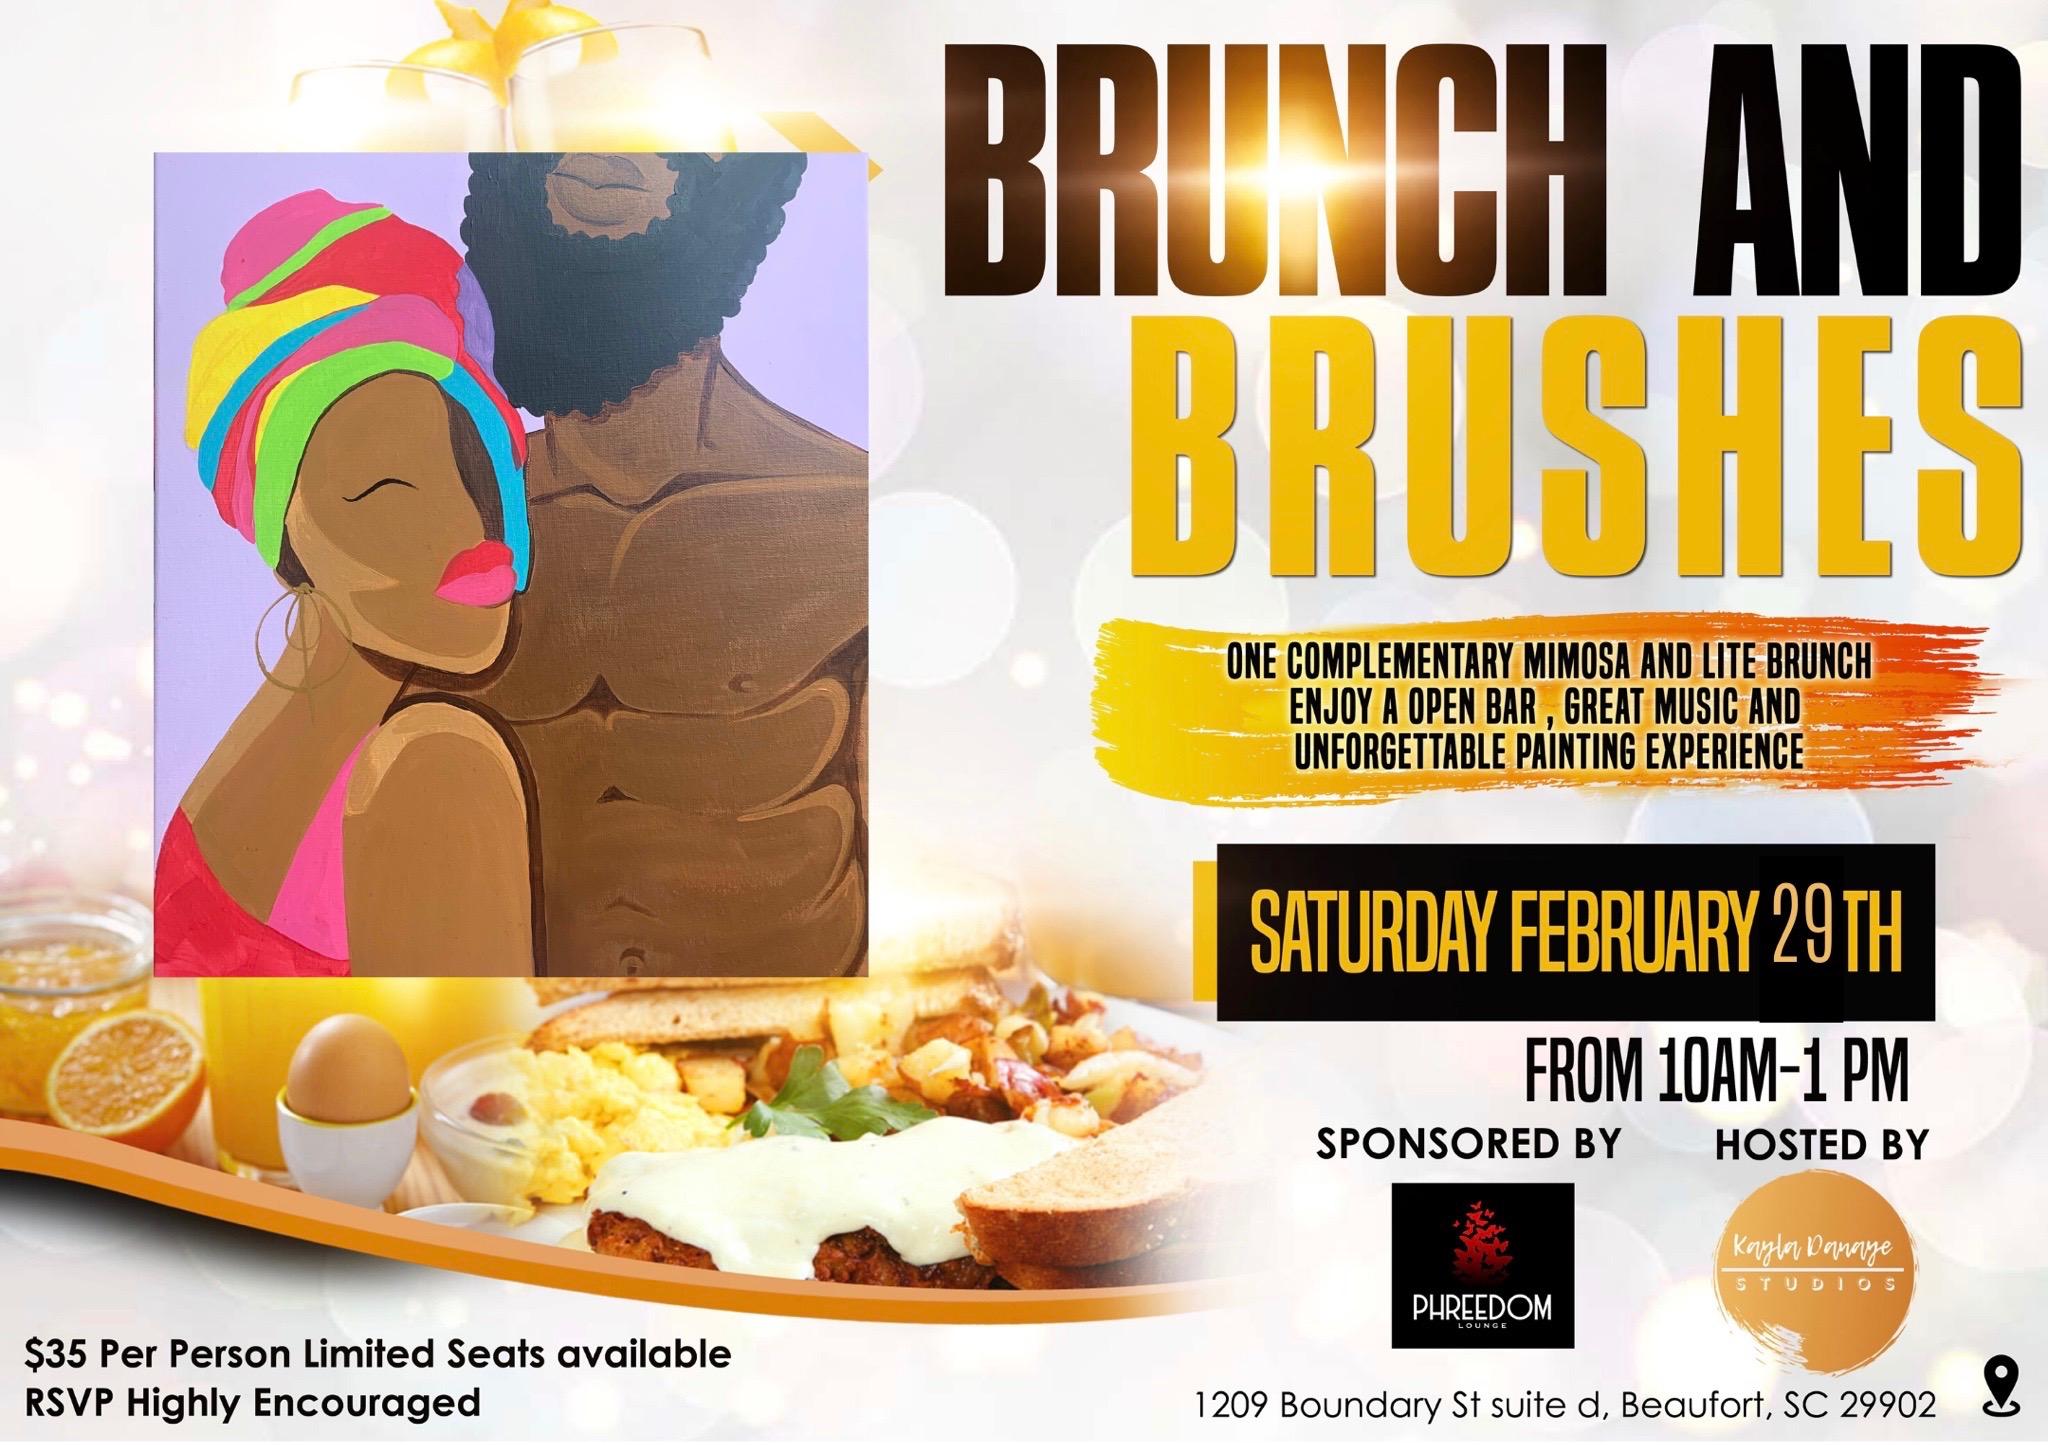 Brunch and Brushes 